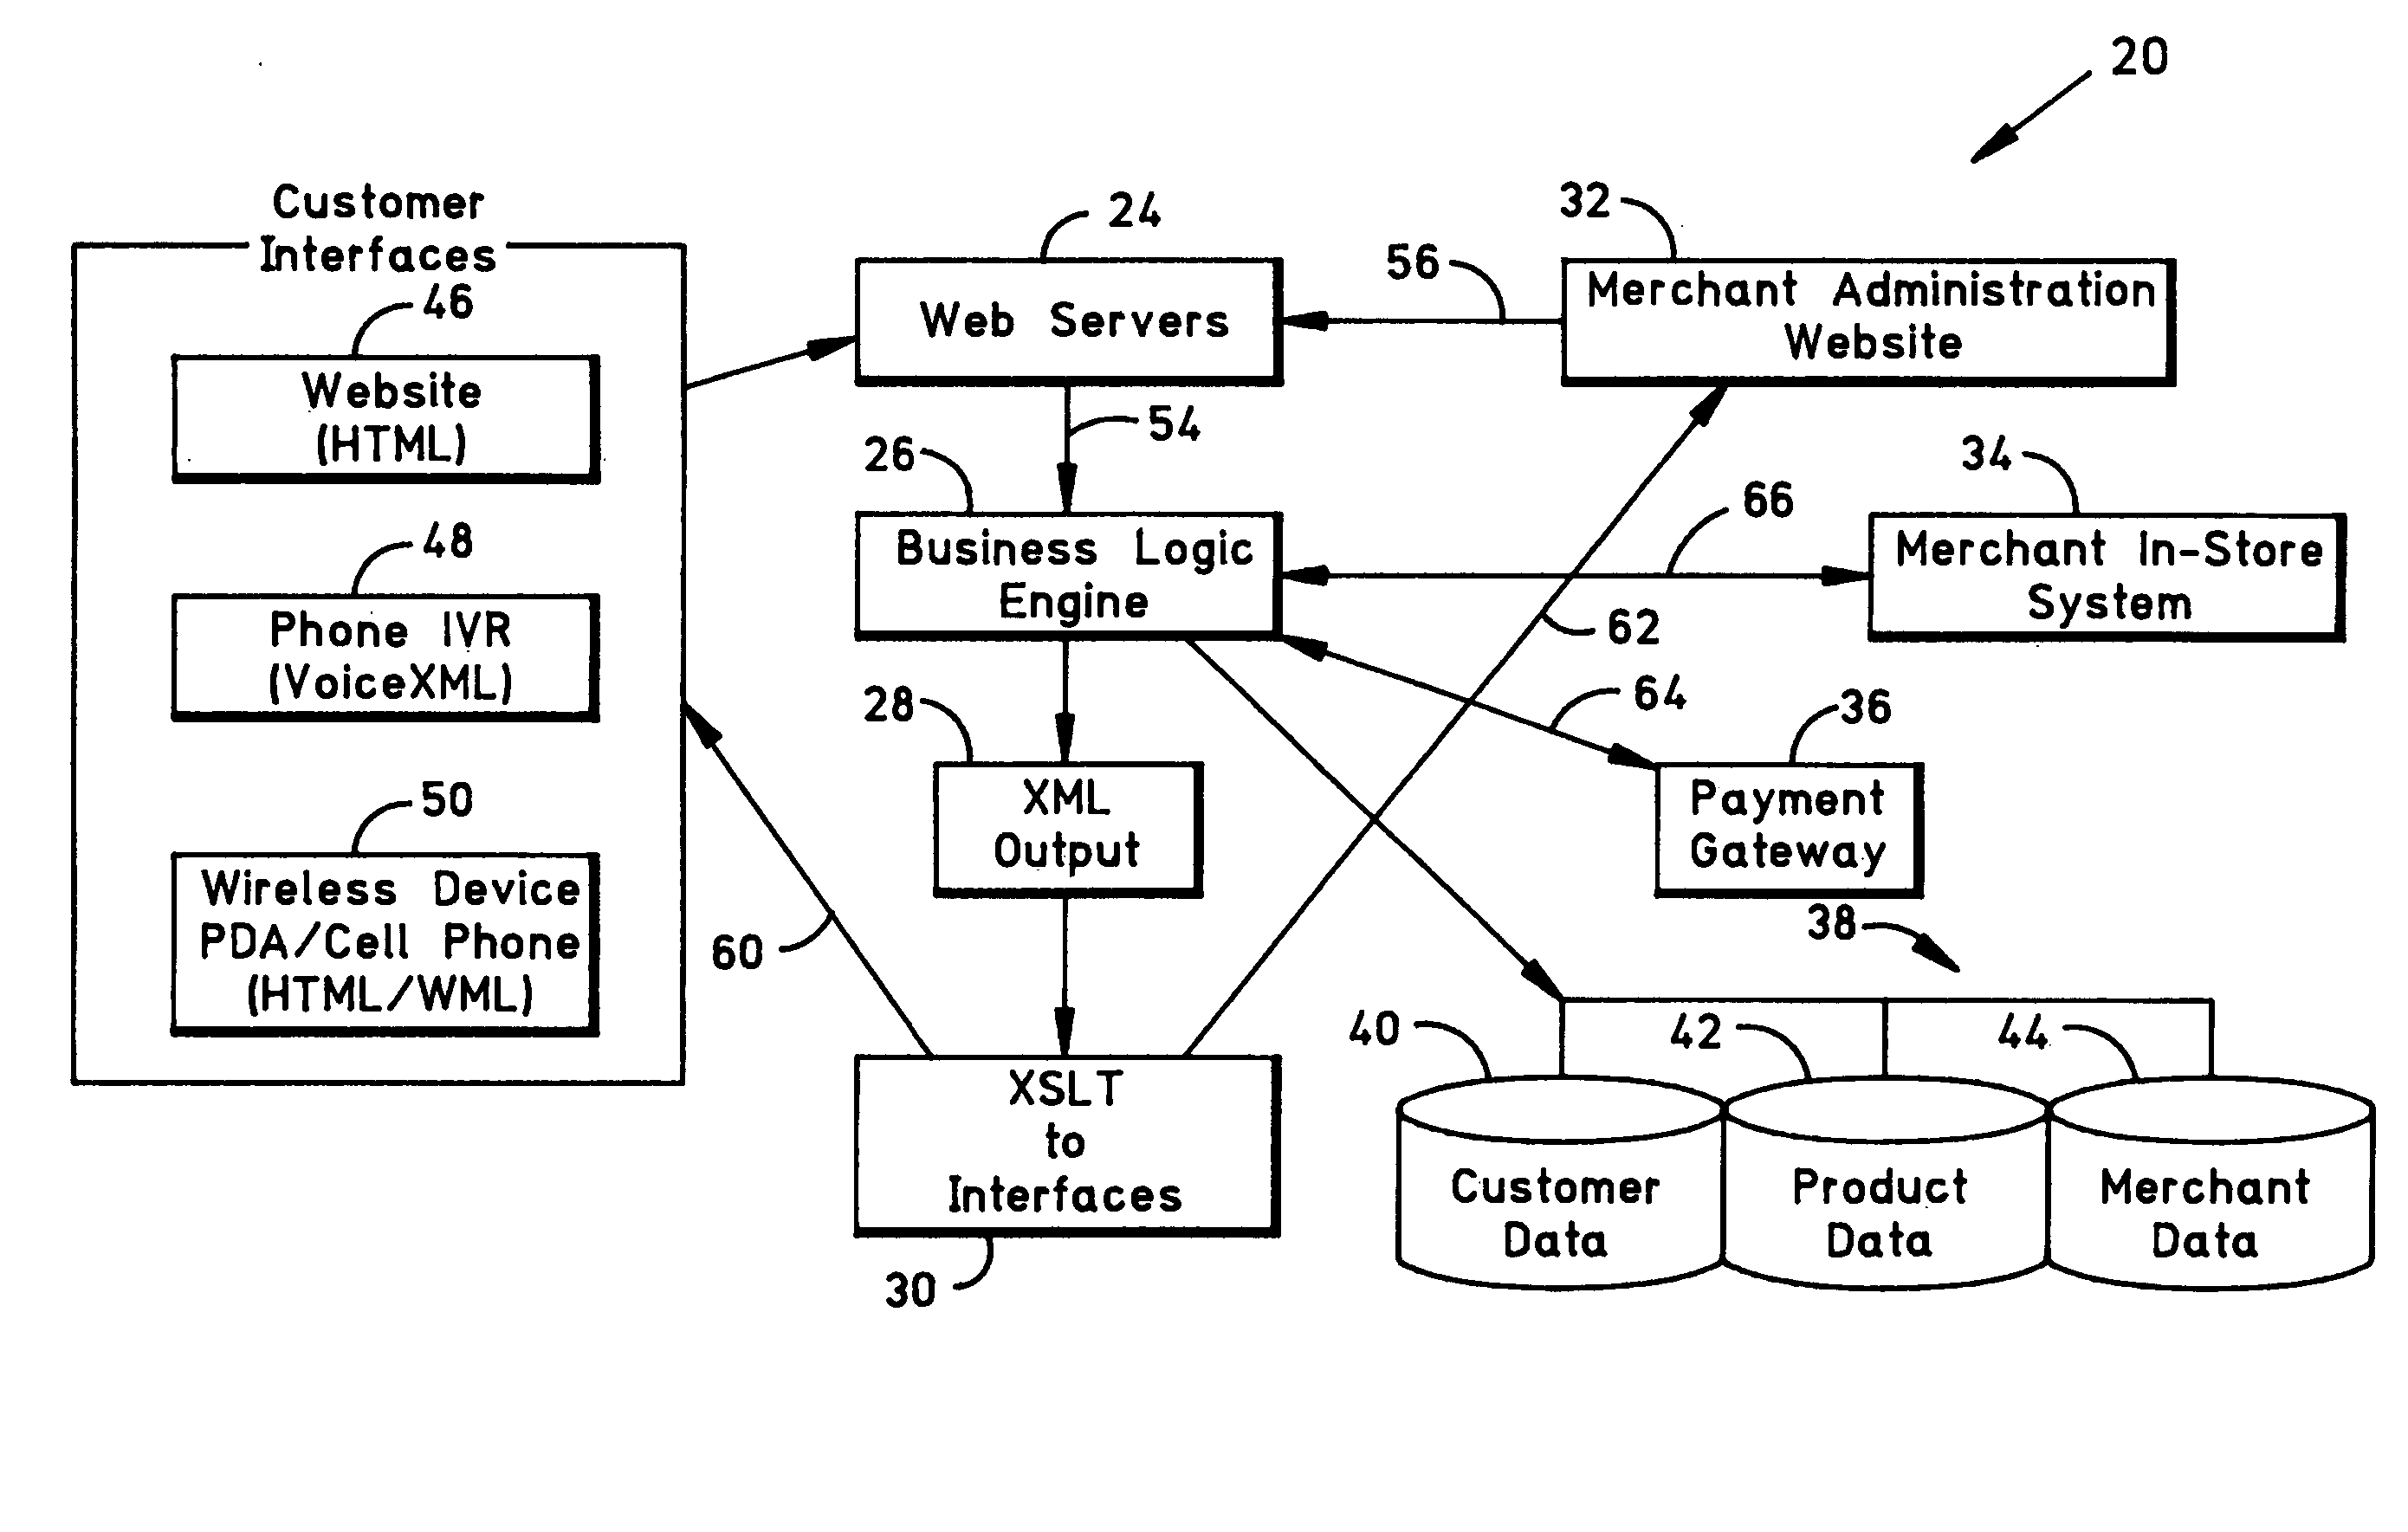 Food order fulfillment system deploying a universal in-store point-of-sale (POS) for preparation and pickup scheduling